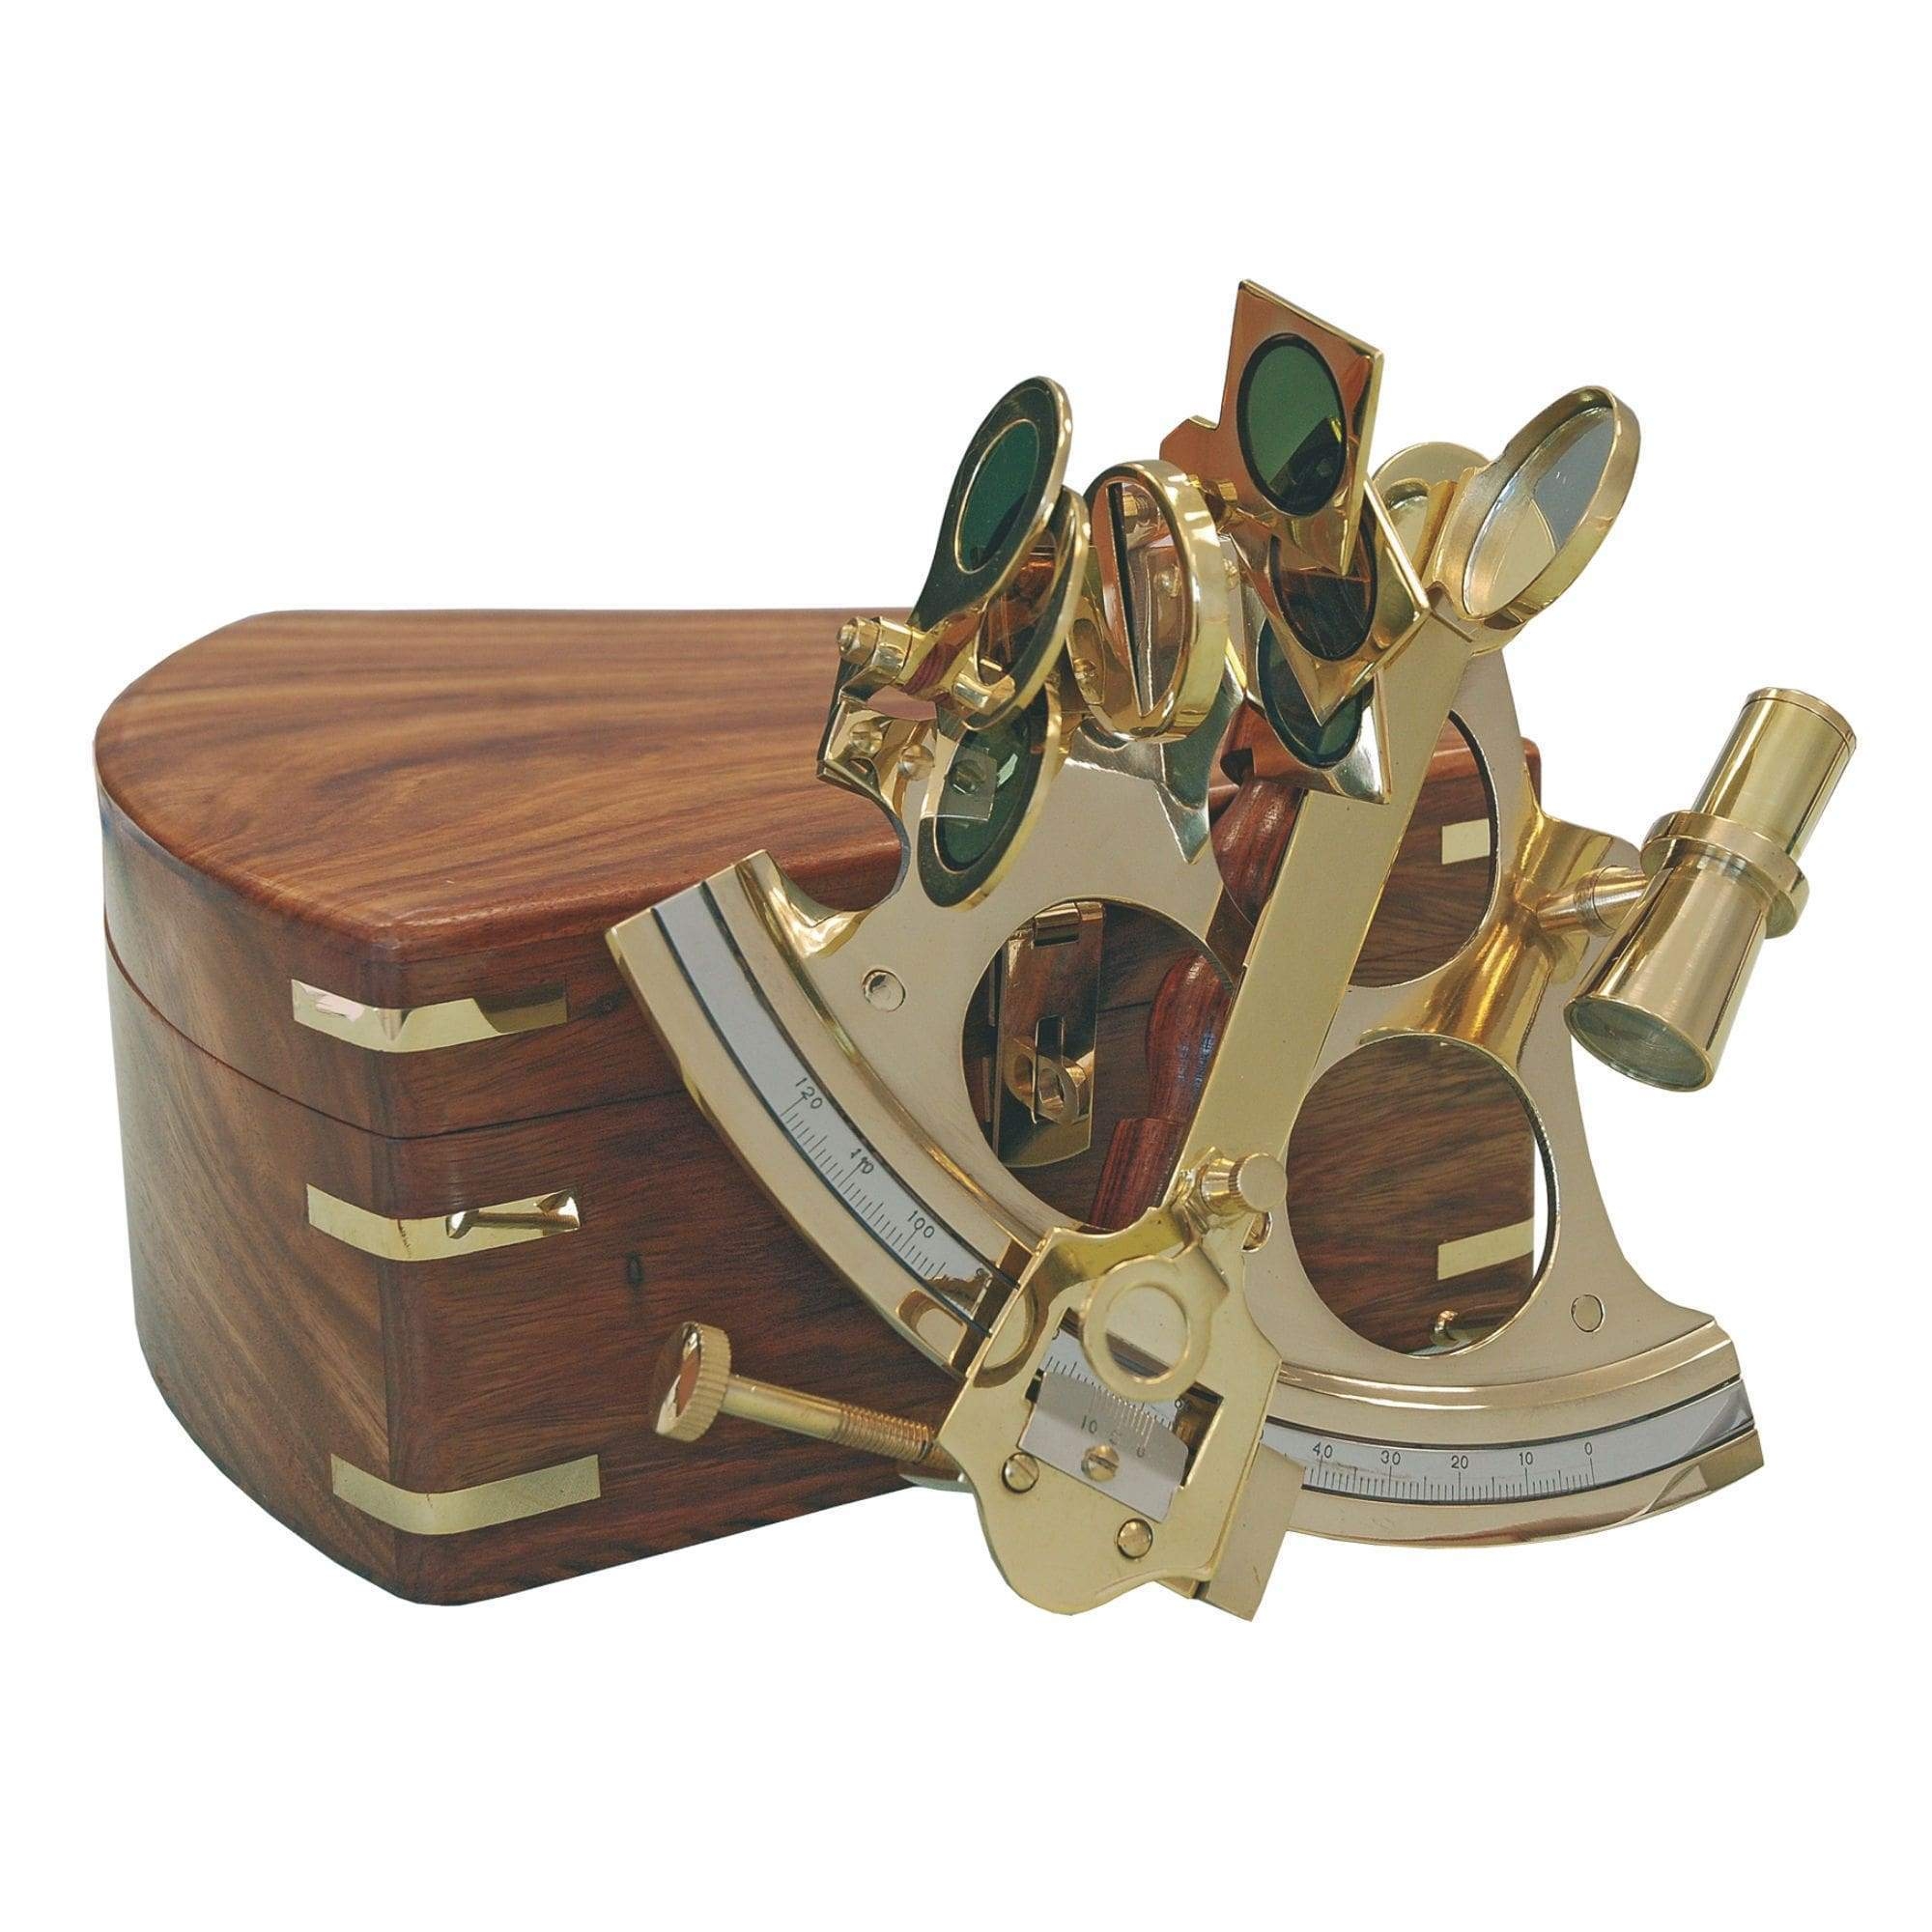 Sextant in Brass with a Wooden Box